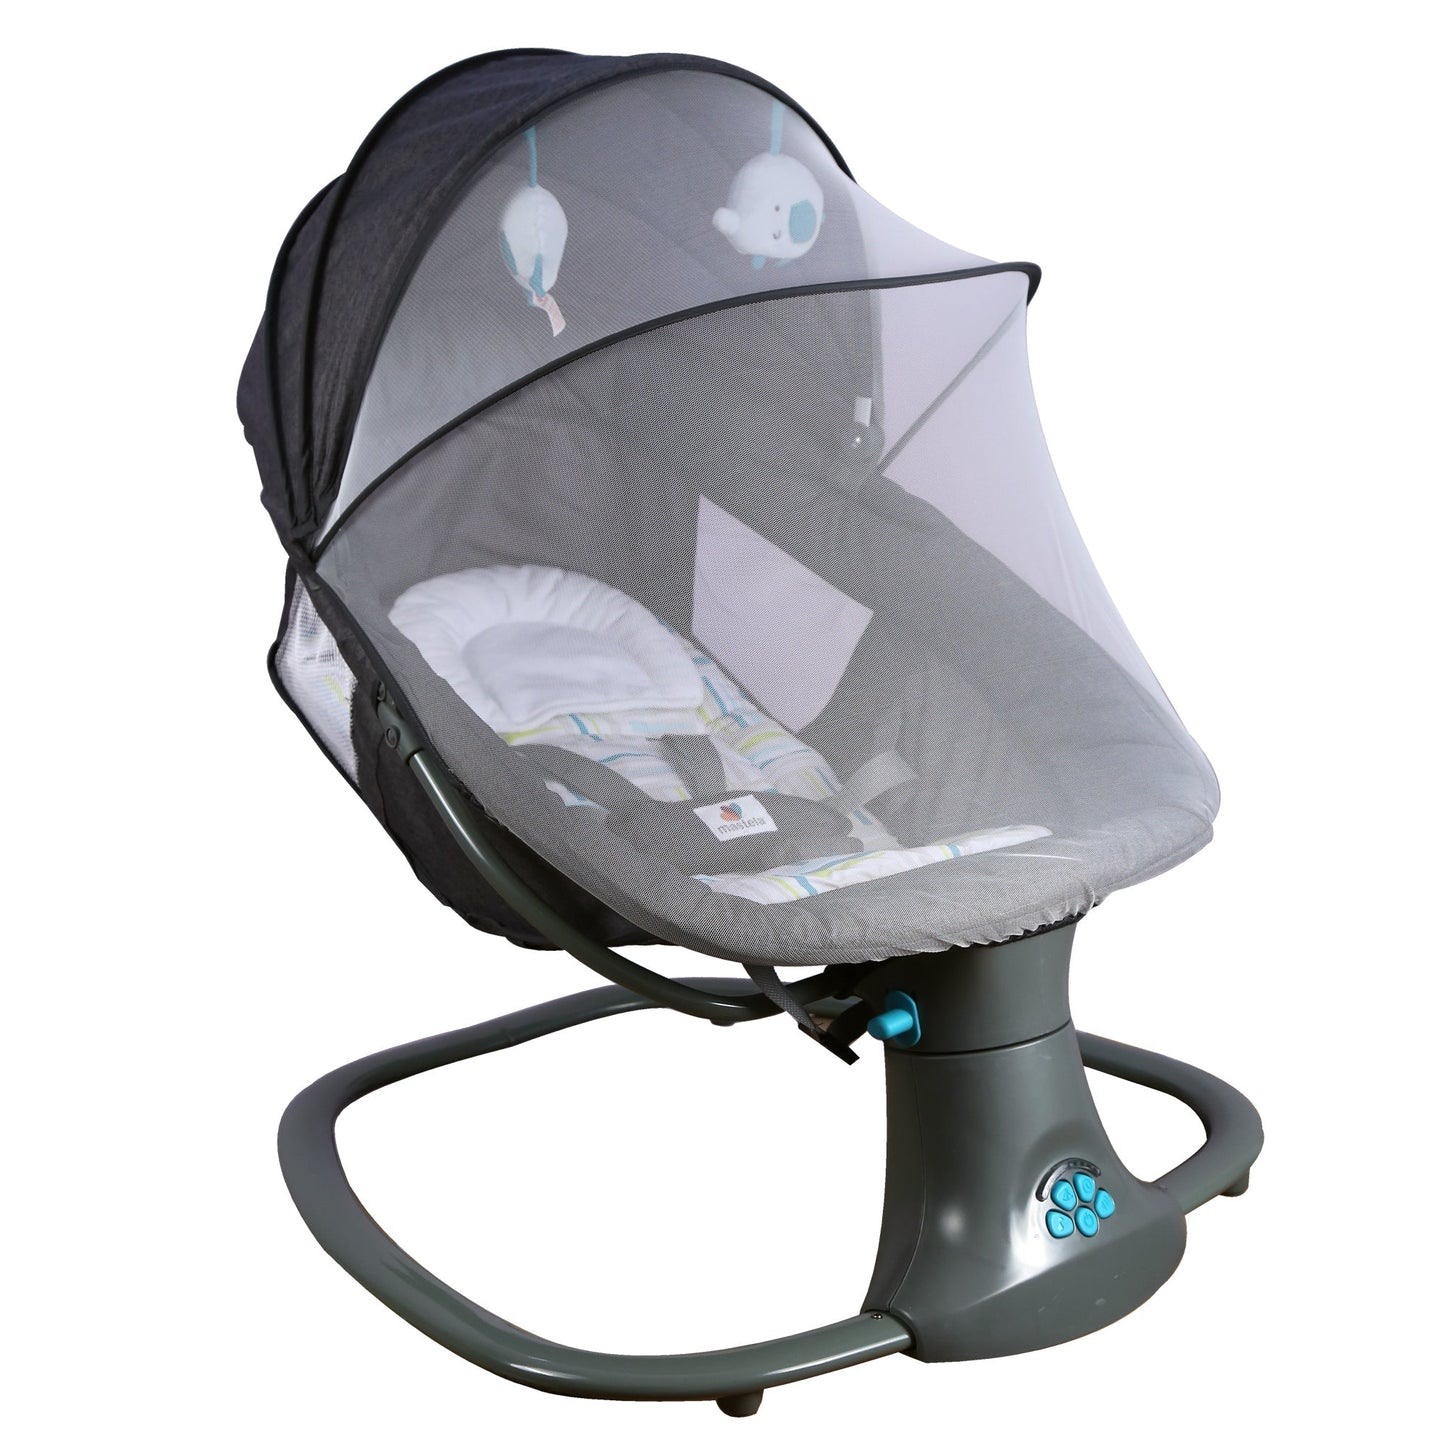 Mastela Deluxe Multi-Function Swing Teal (0 to 36 months)